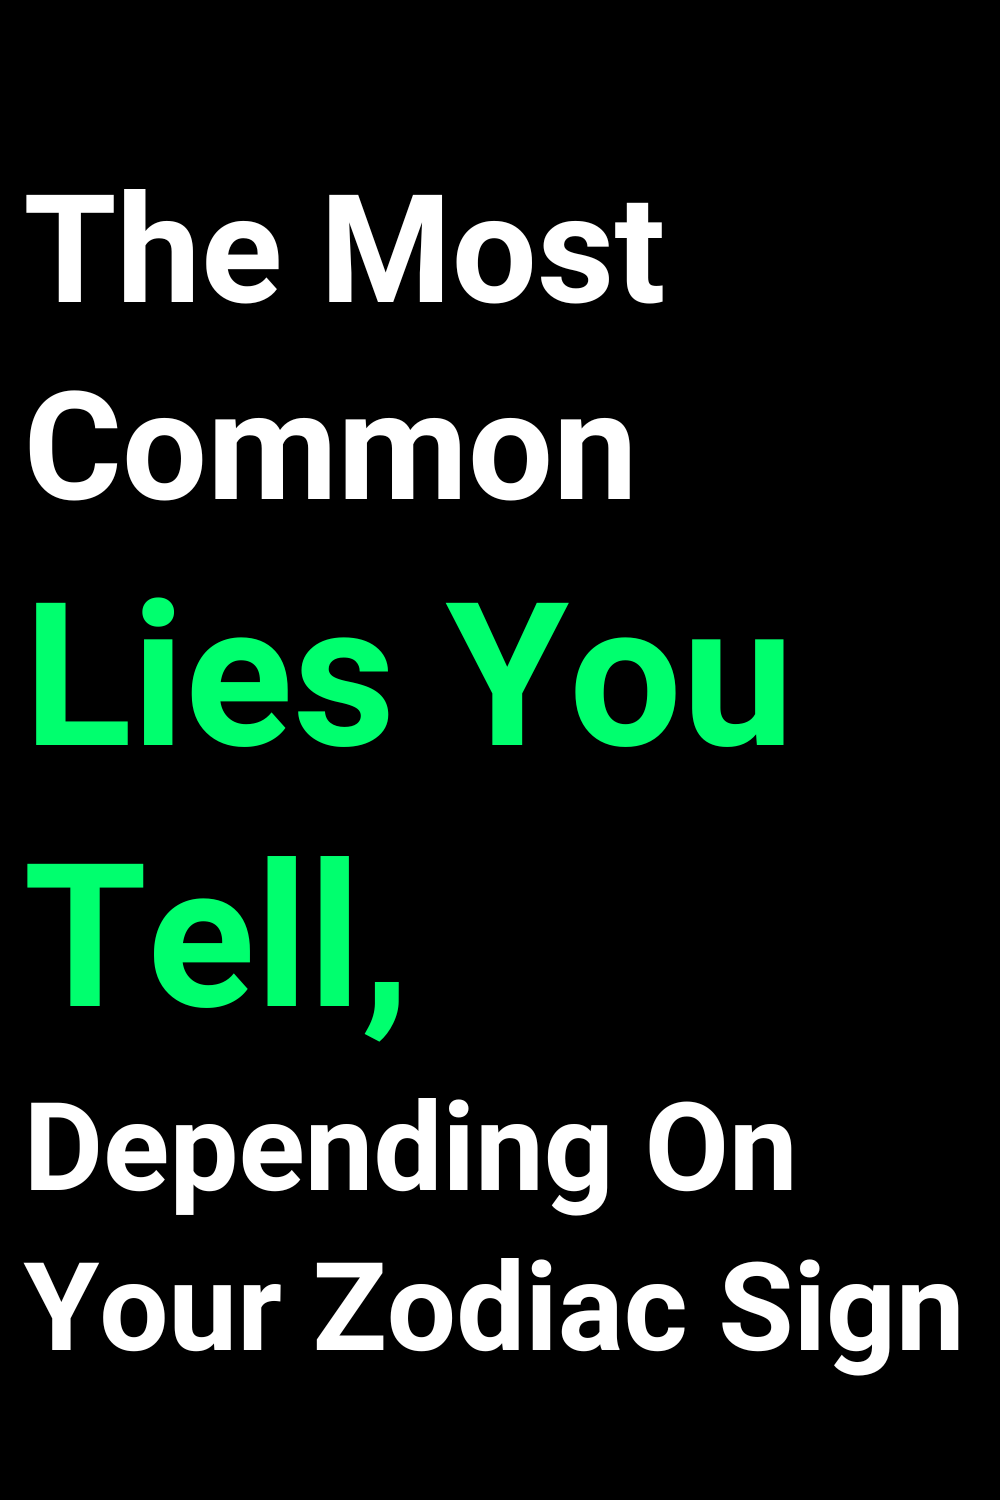 The Most Common Lies You Tell, Depending On Your Zodiac Sign